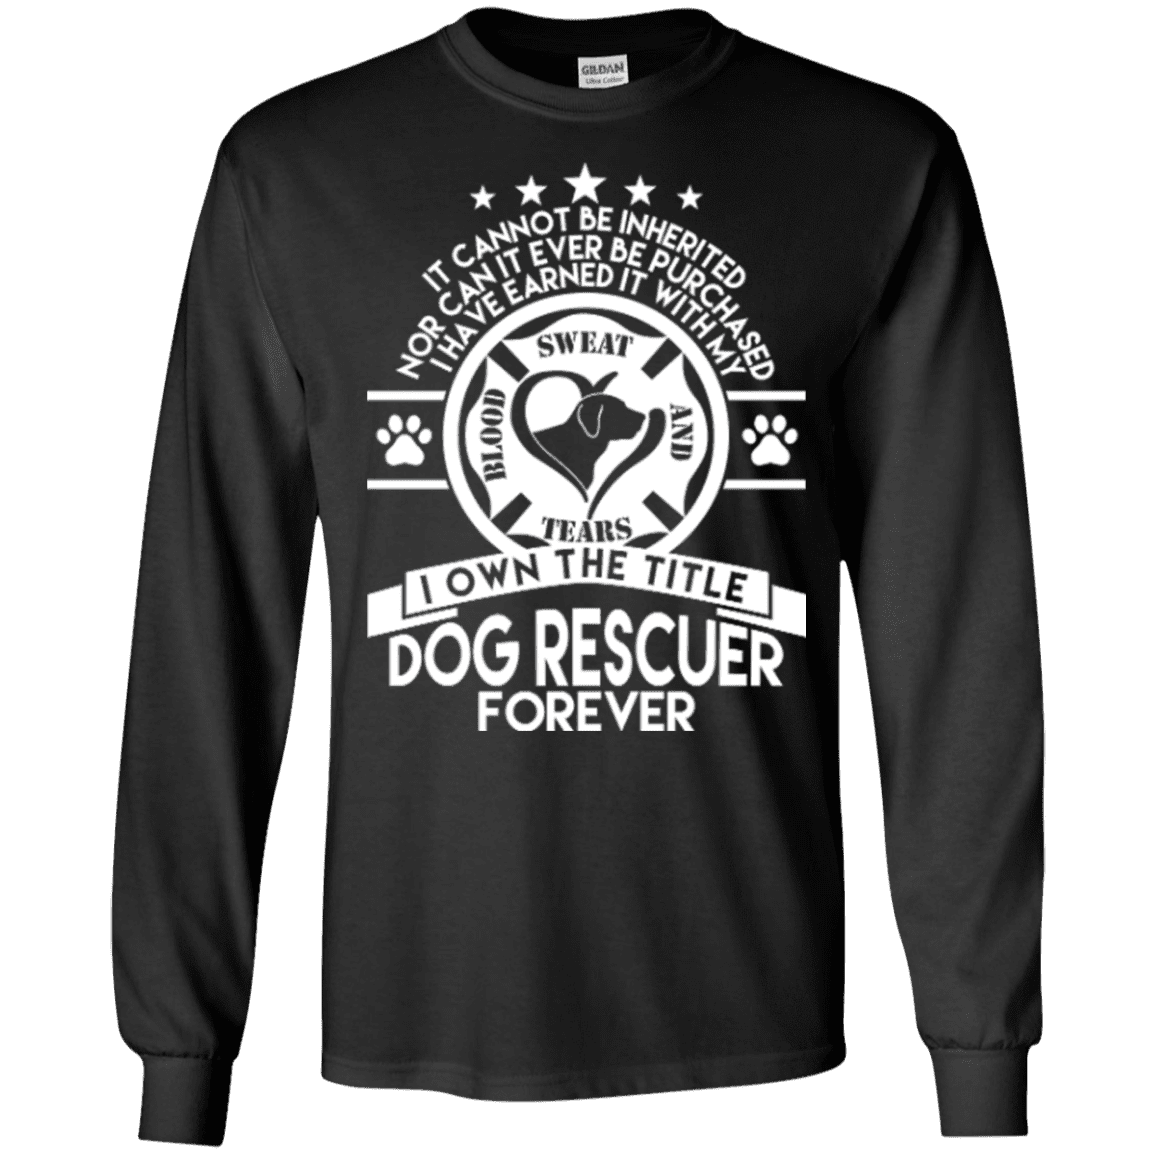 Dog Rescuer Forever - Long Sleeve T Shirt.